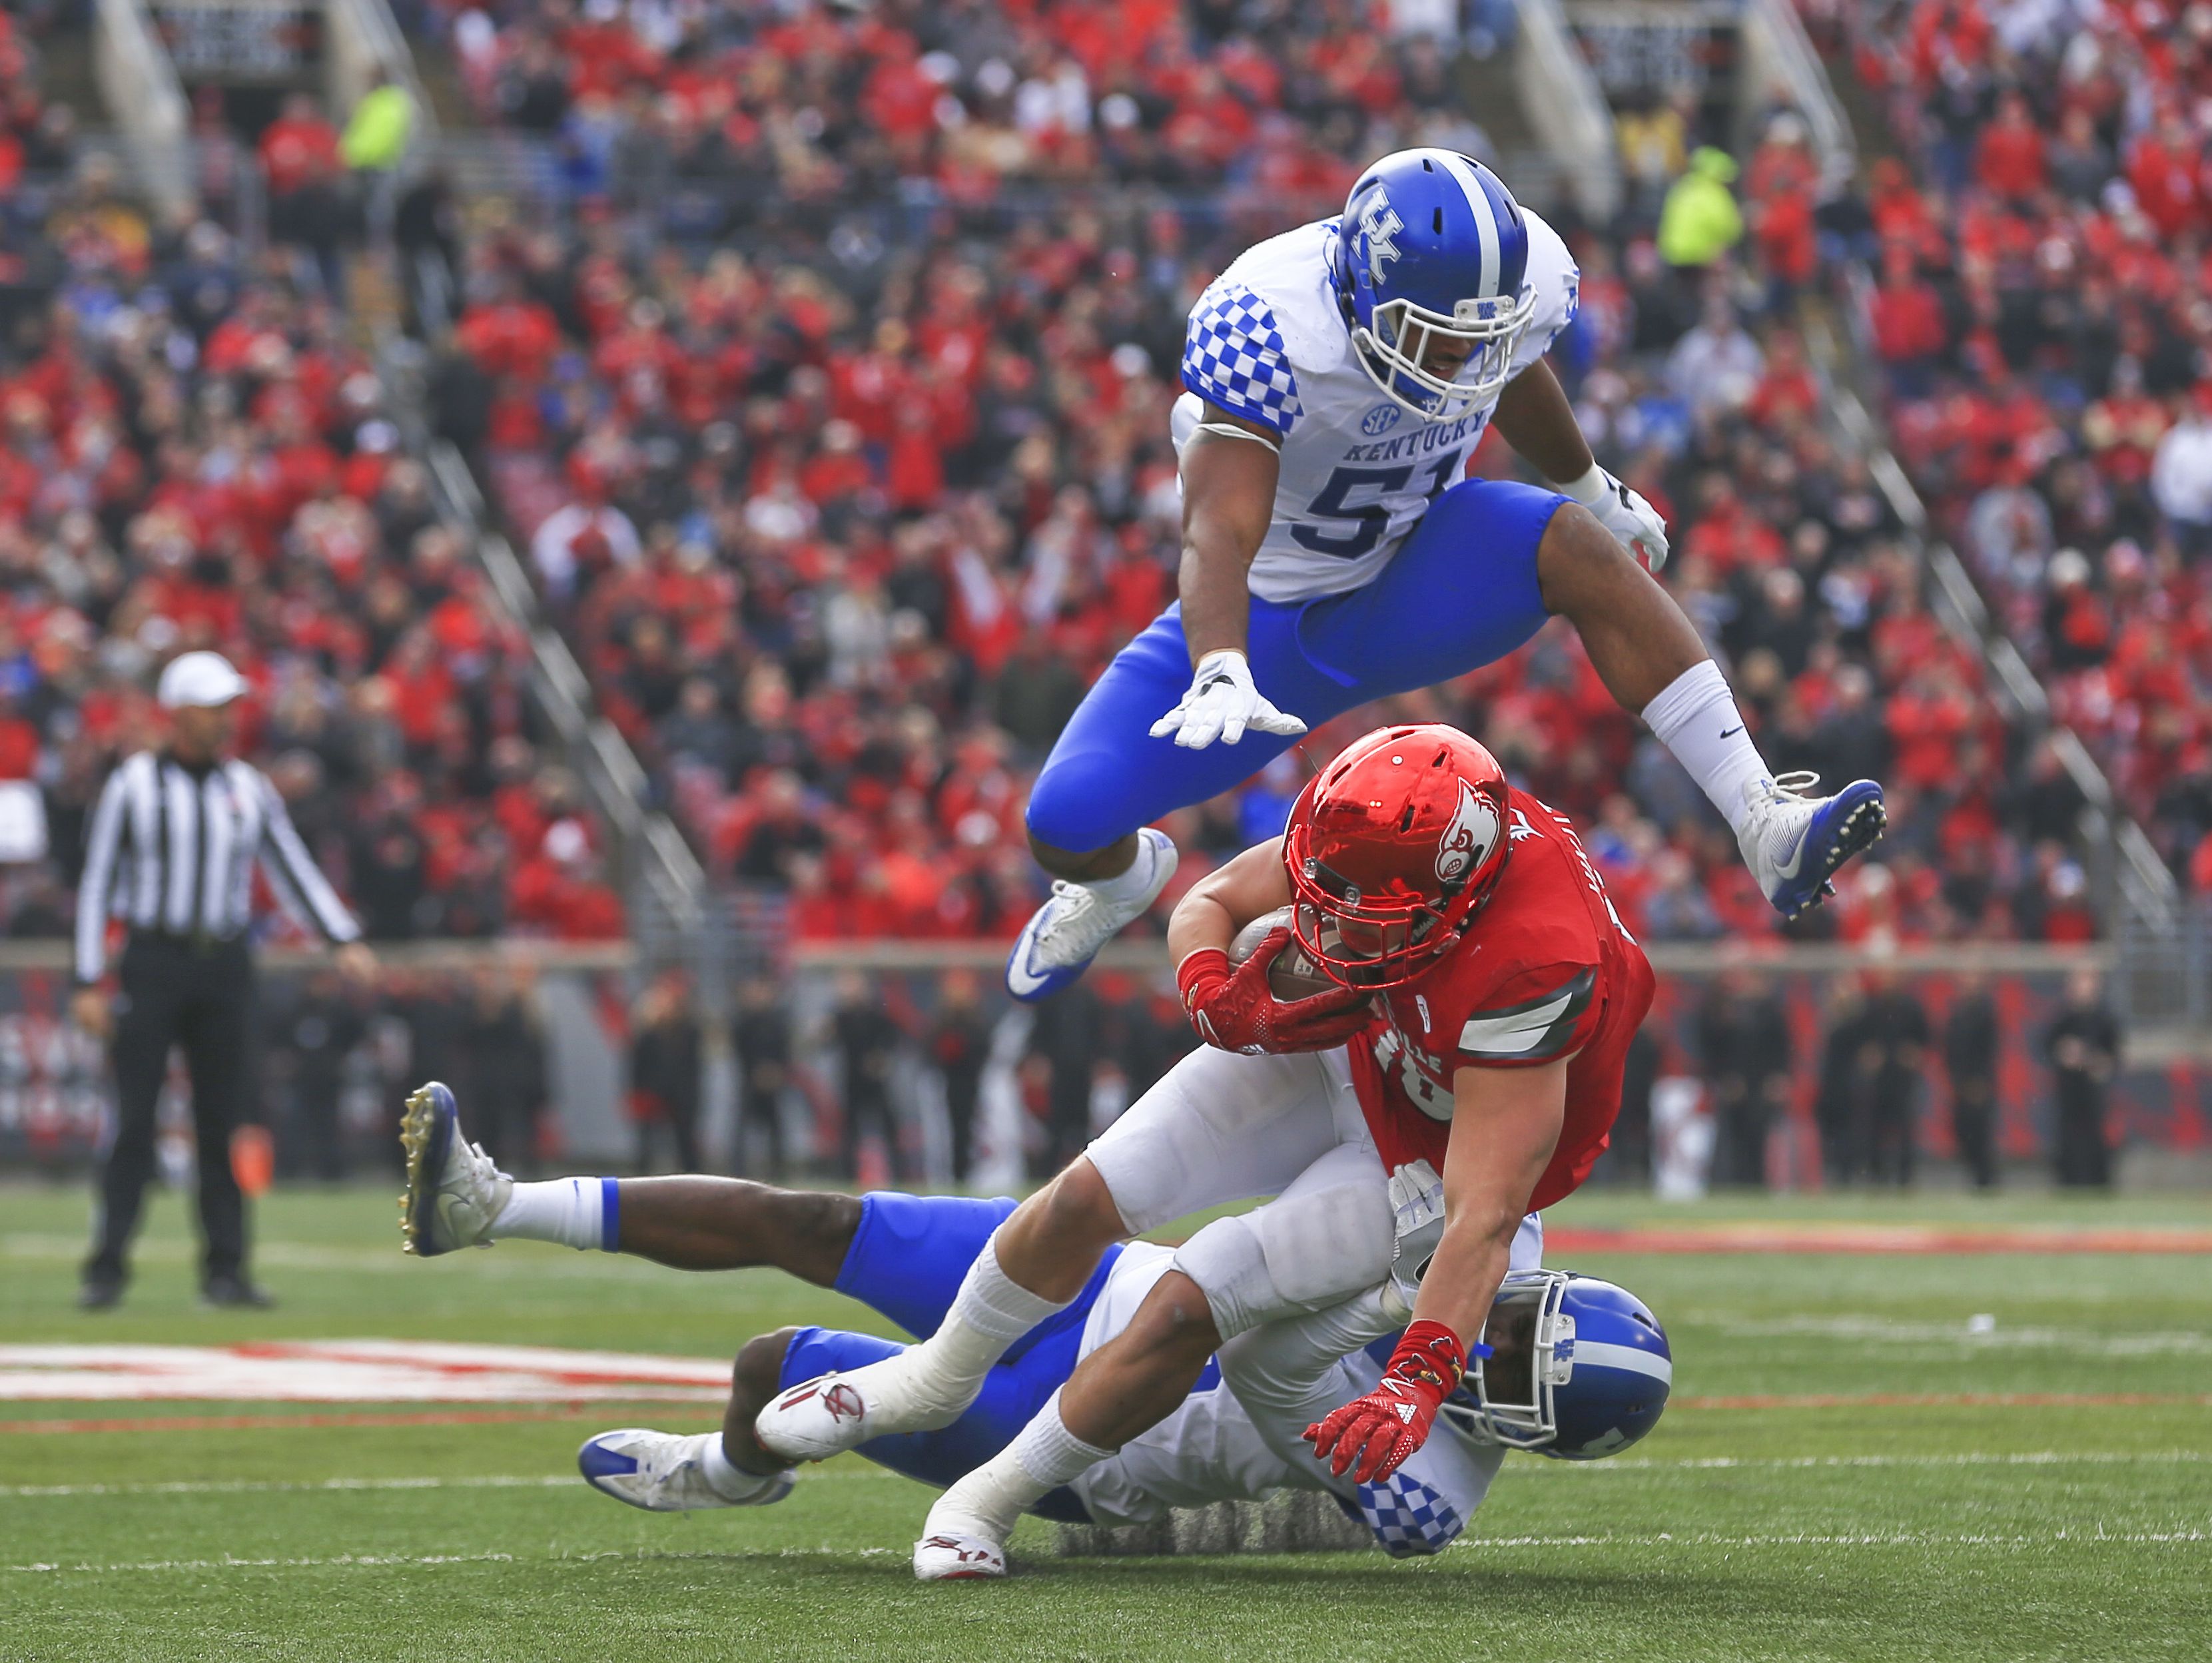 Kentucky vs. Louisville: Governor’s Cup 2018 live updates and scores | USA TODAY Sports